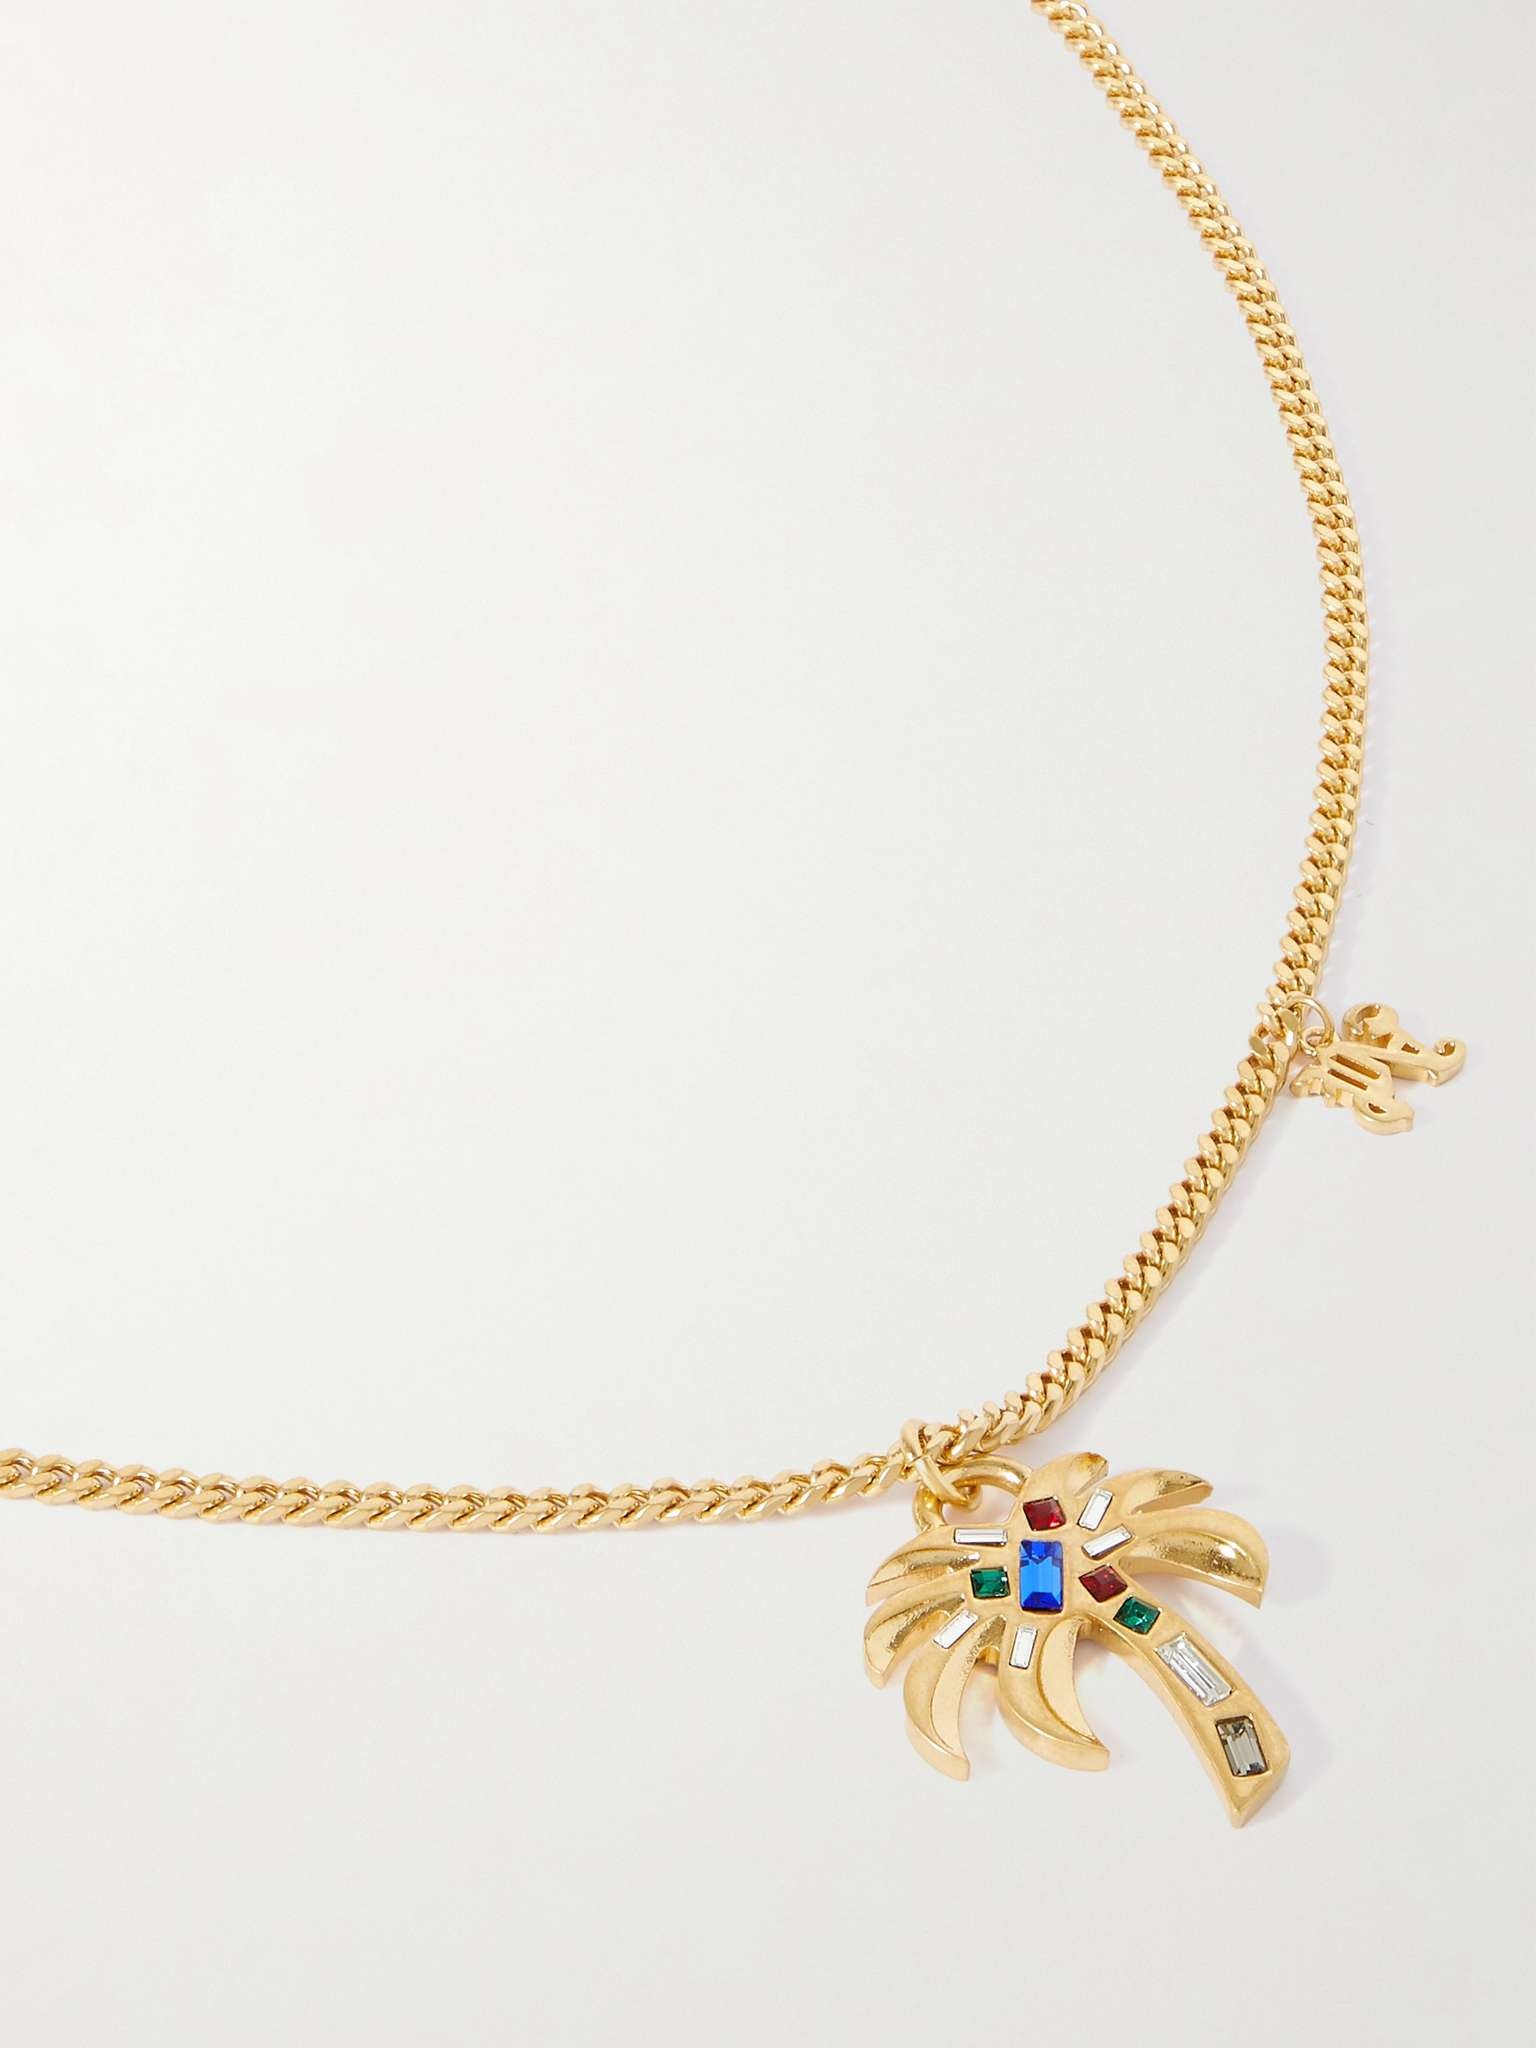 Gold-Tone and Glass Pendant Necklace - 4